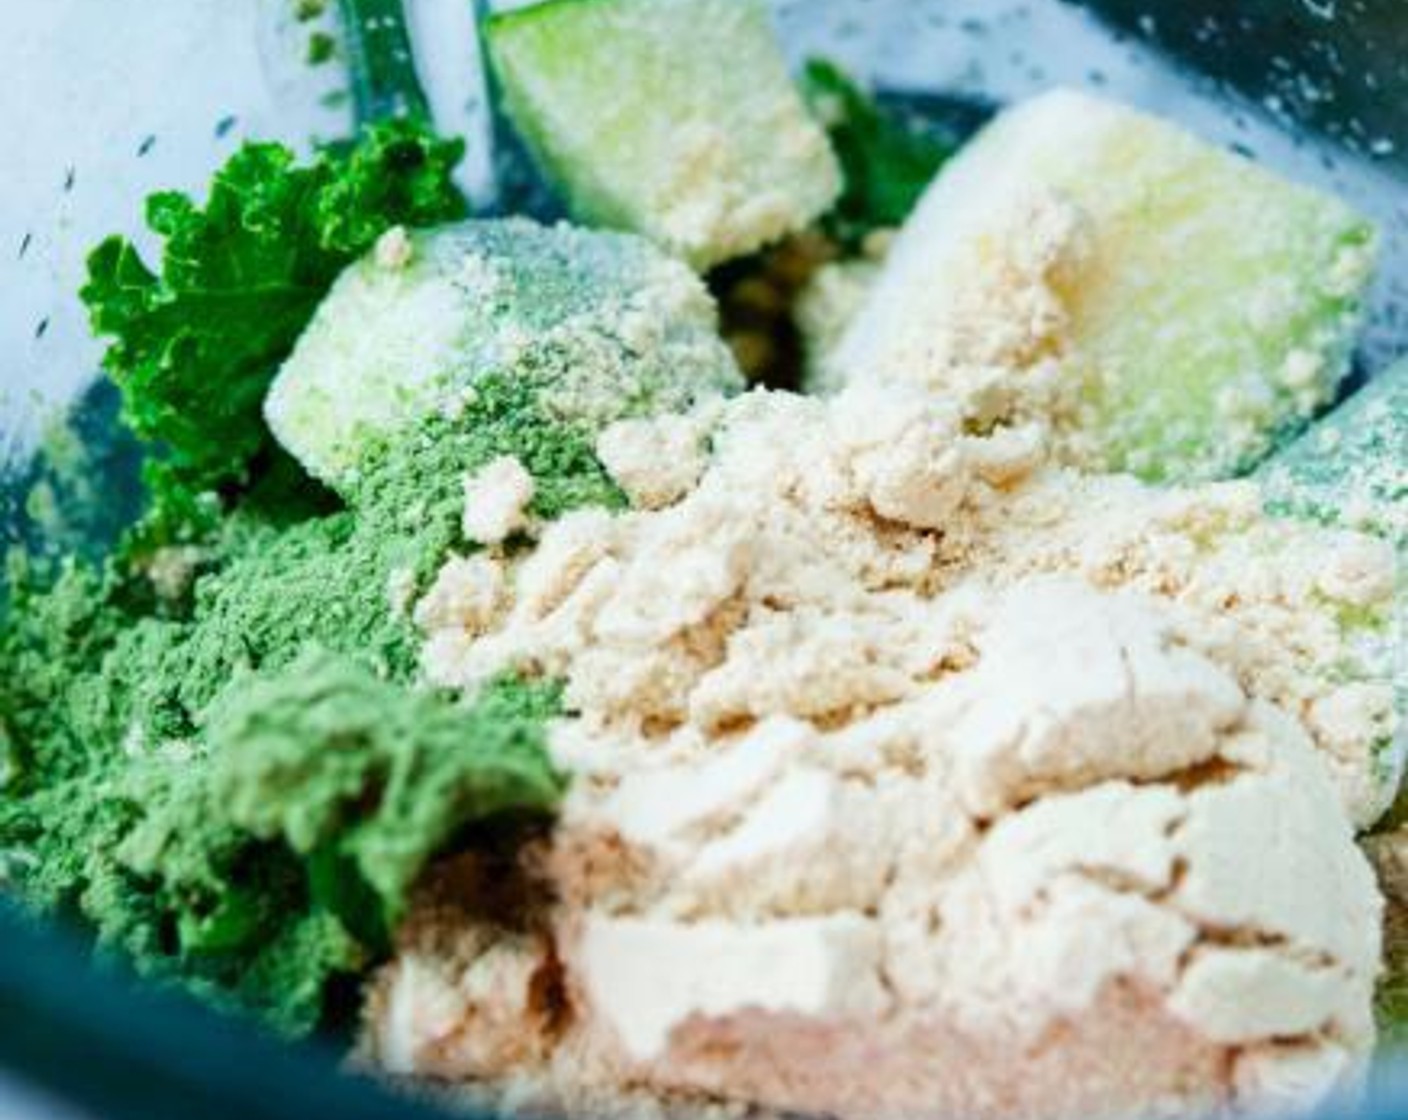 step 1 Into a blender, add and mix the Pea Protein Powder (1 scoop), Zucchini (1/2 cup), Tropeaka Ultra Cleanse (1 Tbsp), Coconut Water (3/4 cup), Baby Kale (1/4 cup), Pepitas (to taste), and Hemp Hearts (to taste).